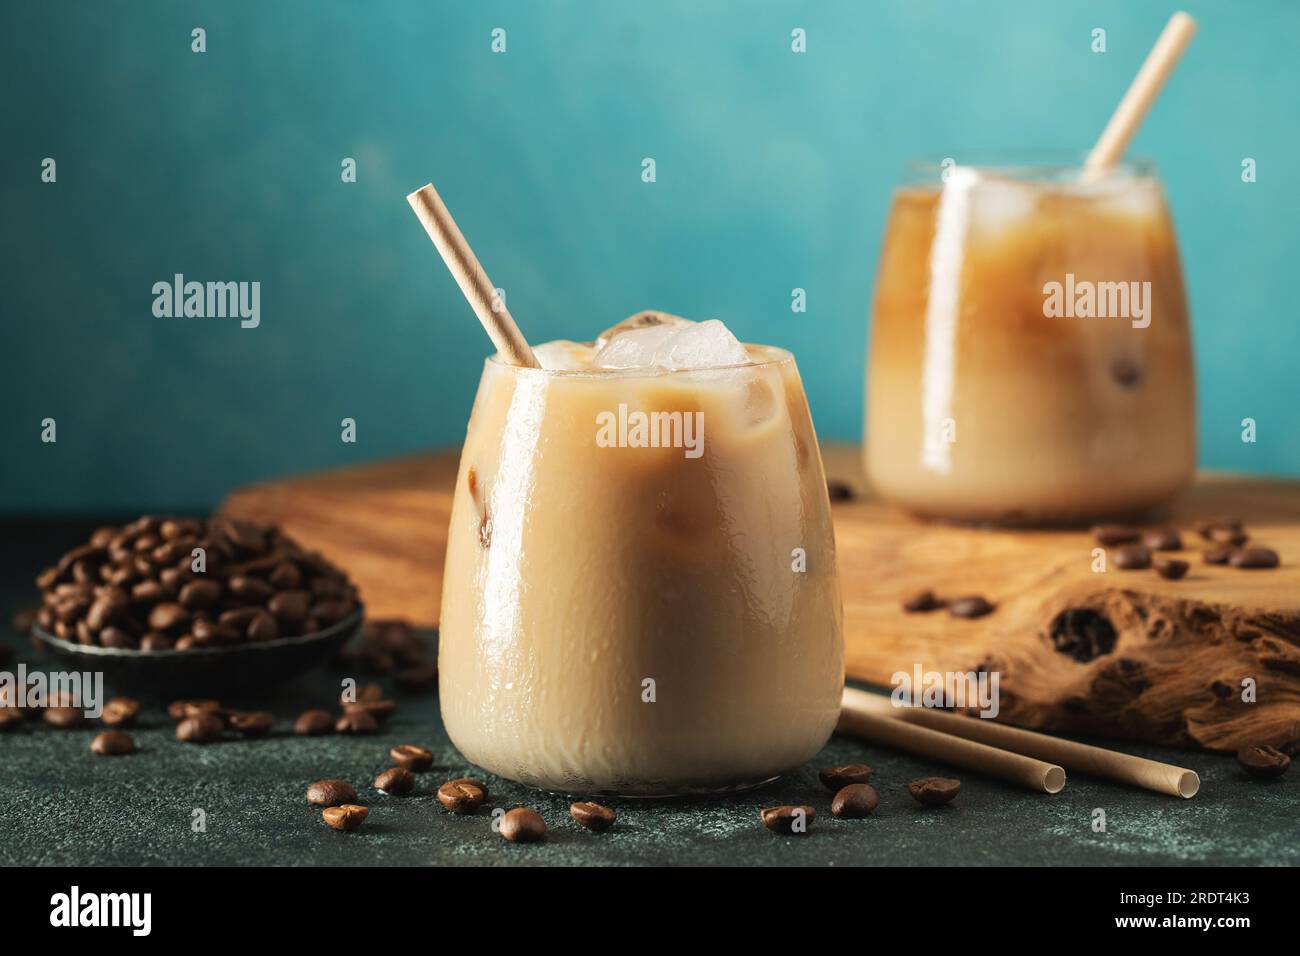 https://c8.alamy.com/comp/2RDT4K3/ice-coffee-in-a-tall-glass-with-cream-poured-over-ice-cubes-and-beans-on-a-dark-concrete-table-2RDT4K3.jpg